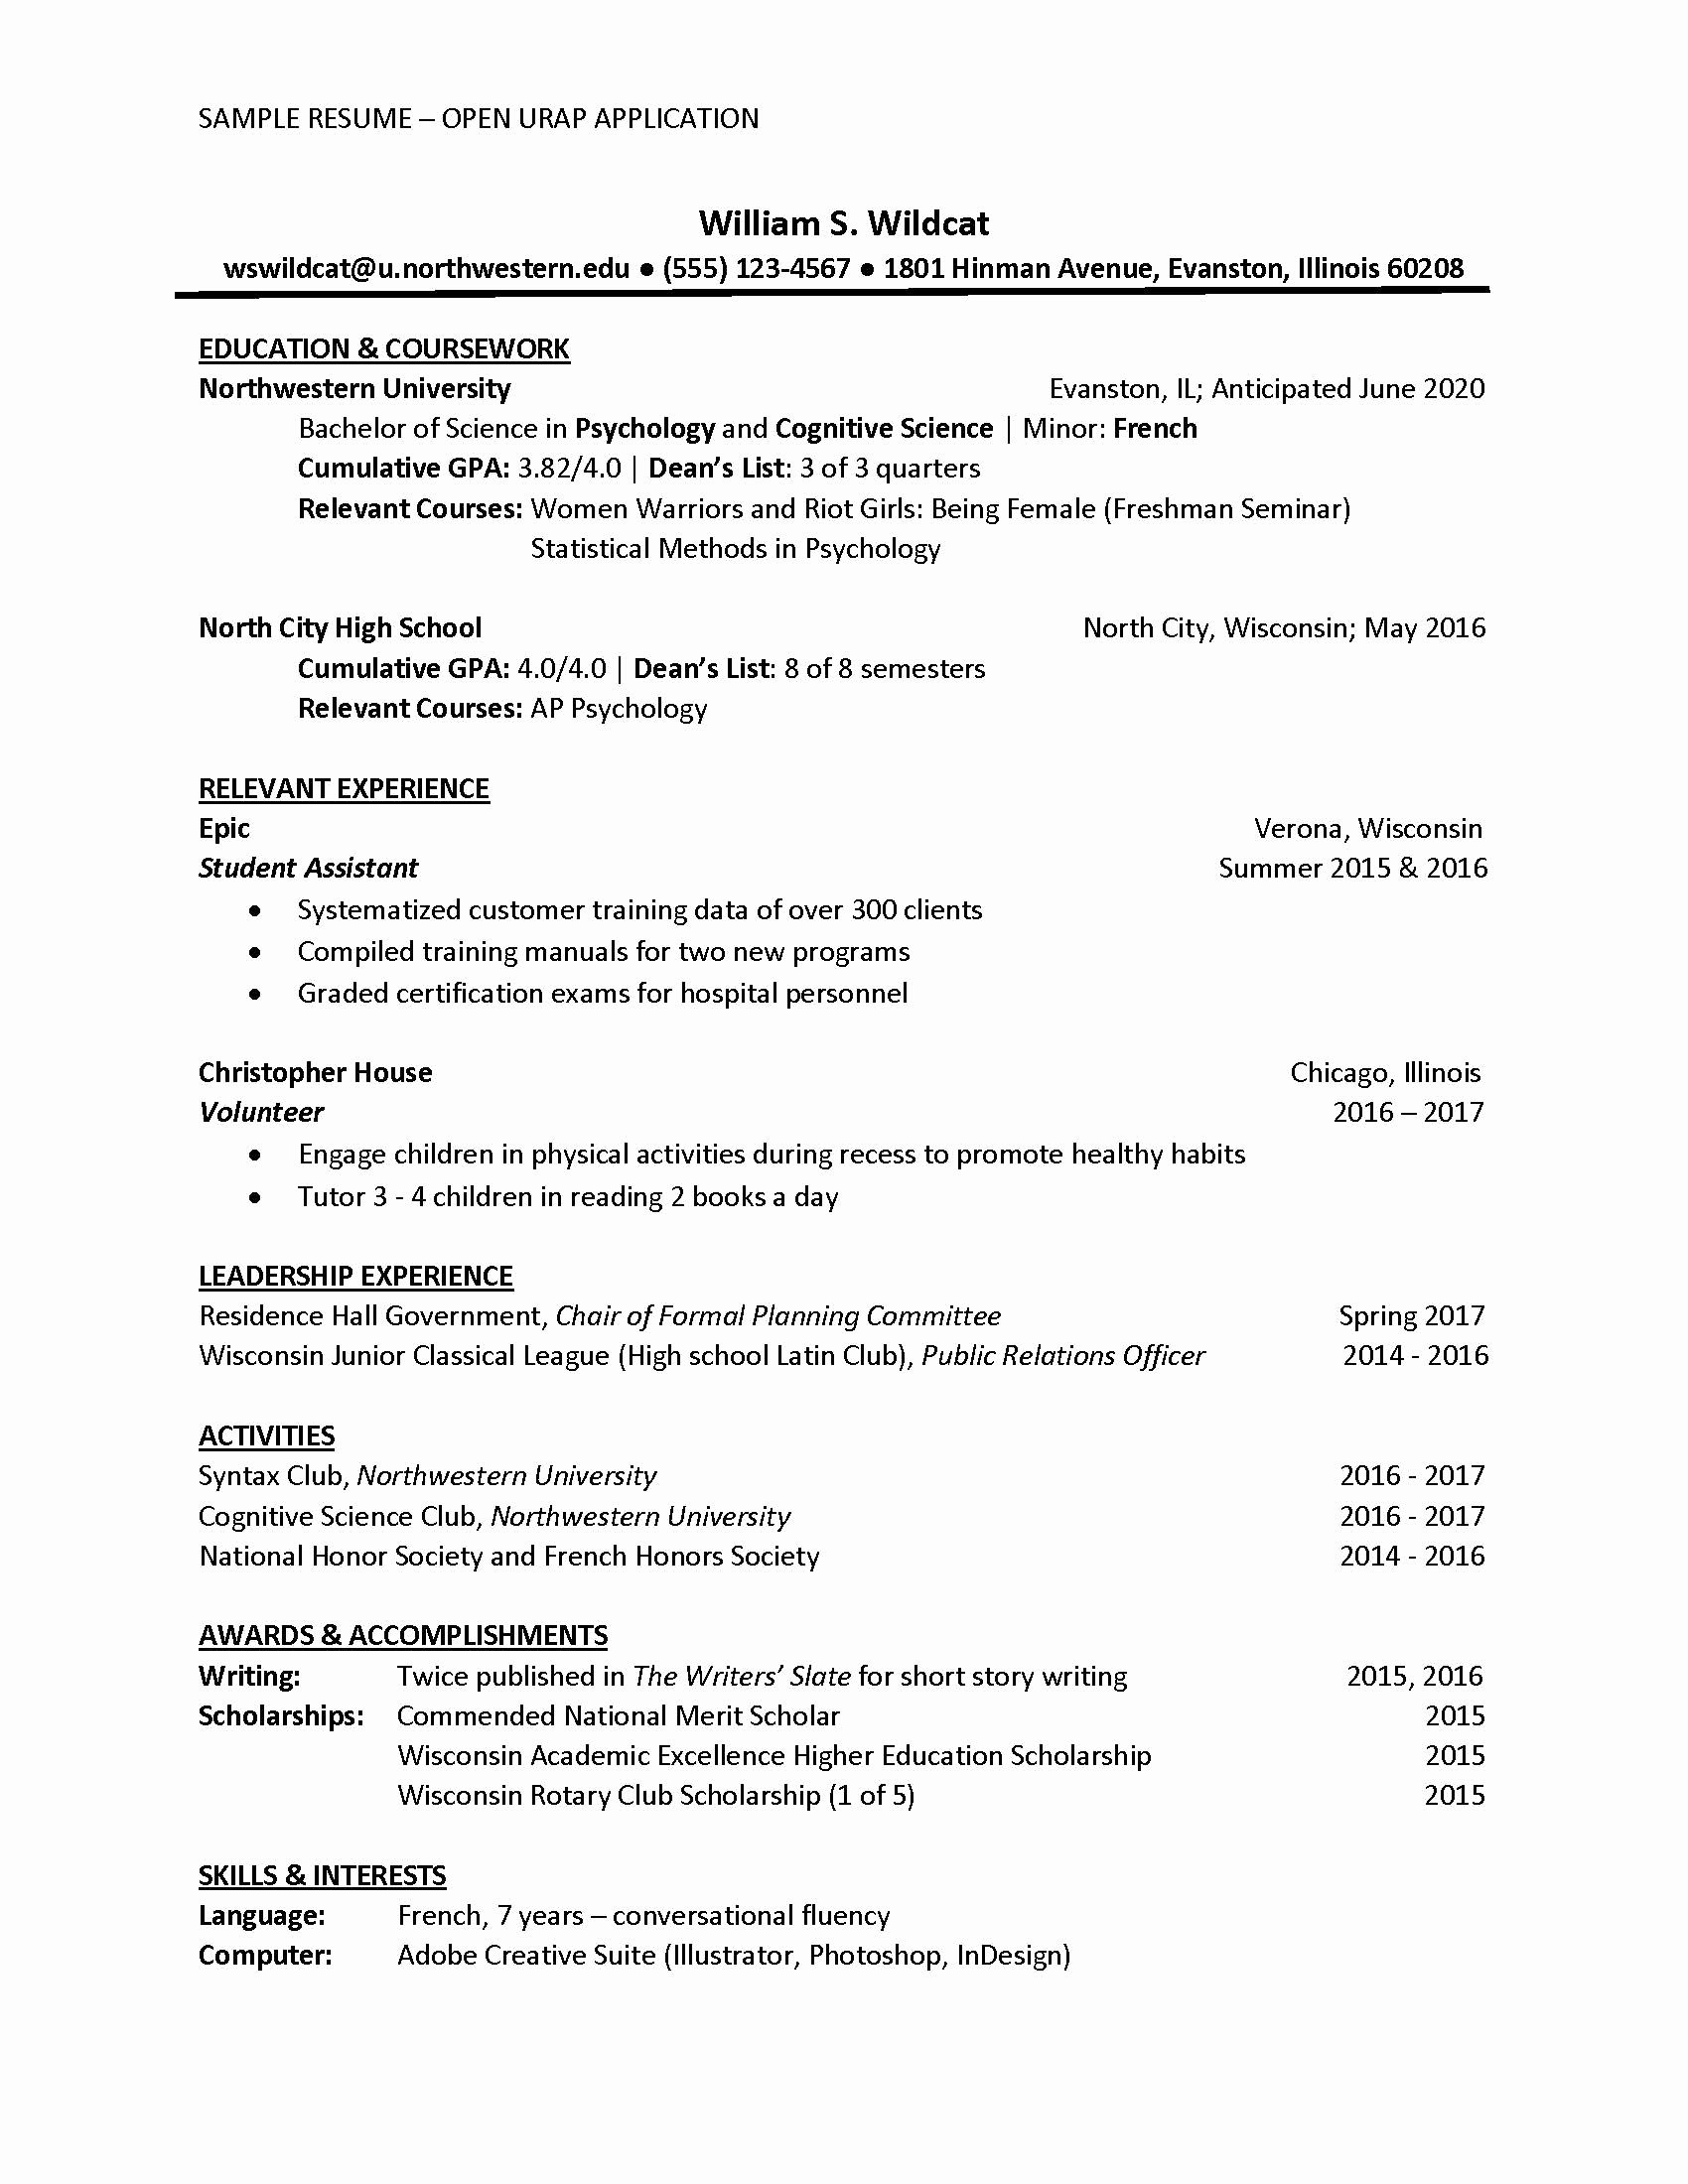 Resume with Honors Unique Example Resume Open Urap Position